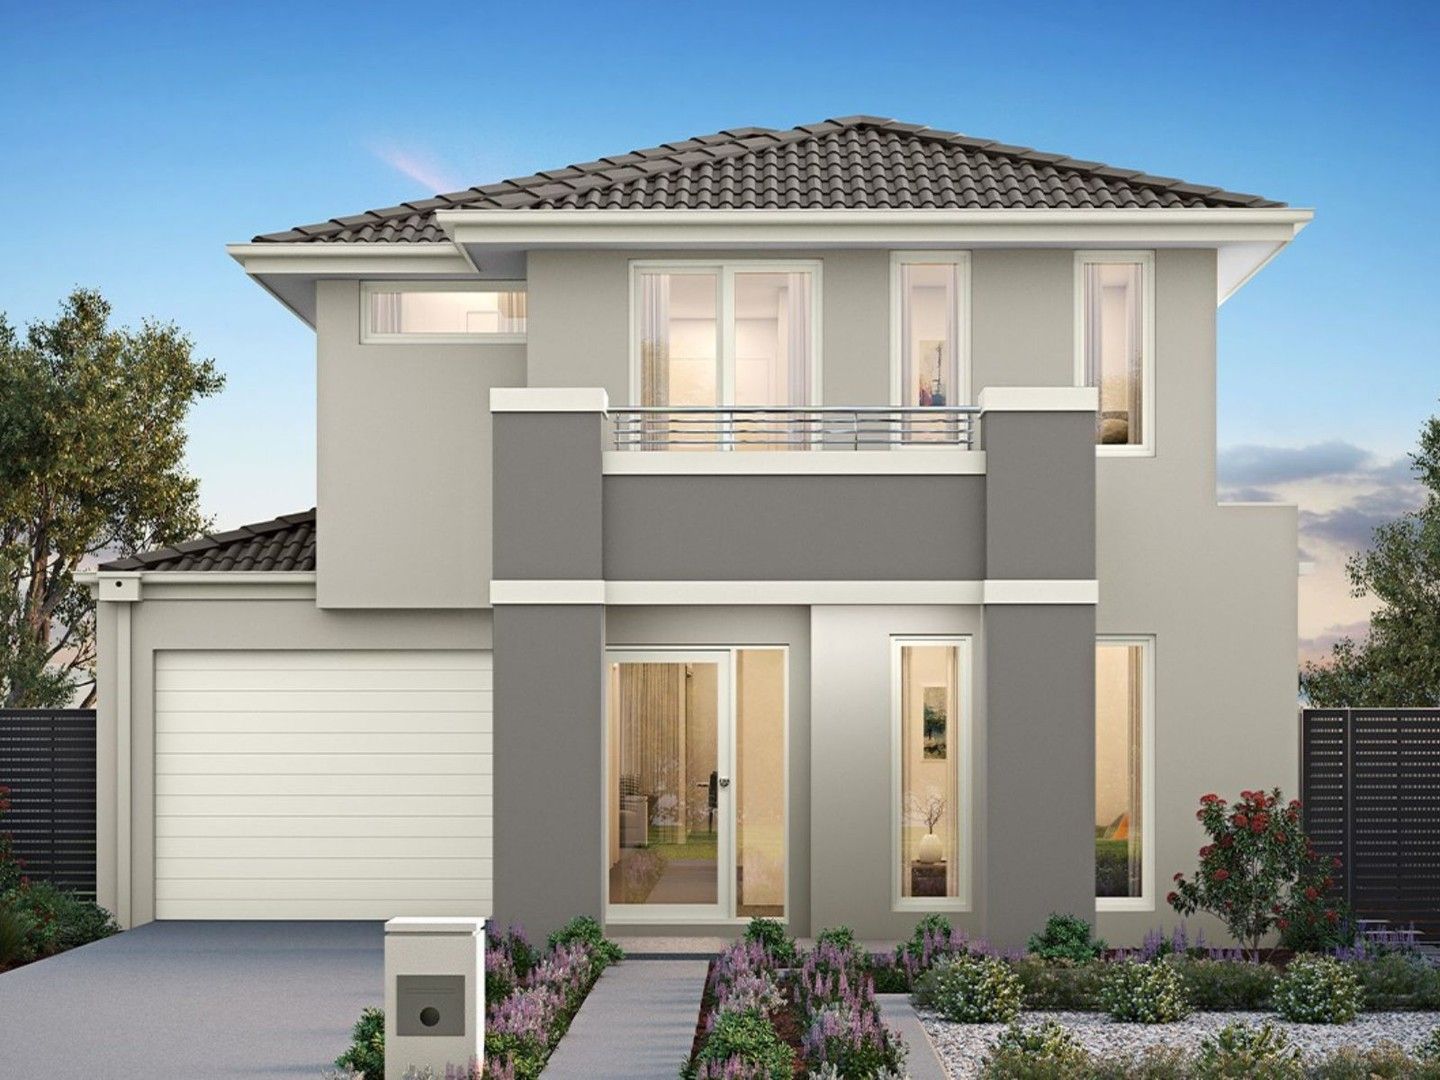 5 bedrooms New House & Land in Custom Build House & Land Package BOX HILL NSW, 2765